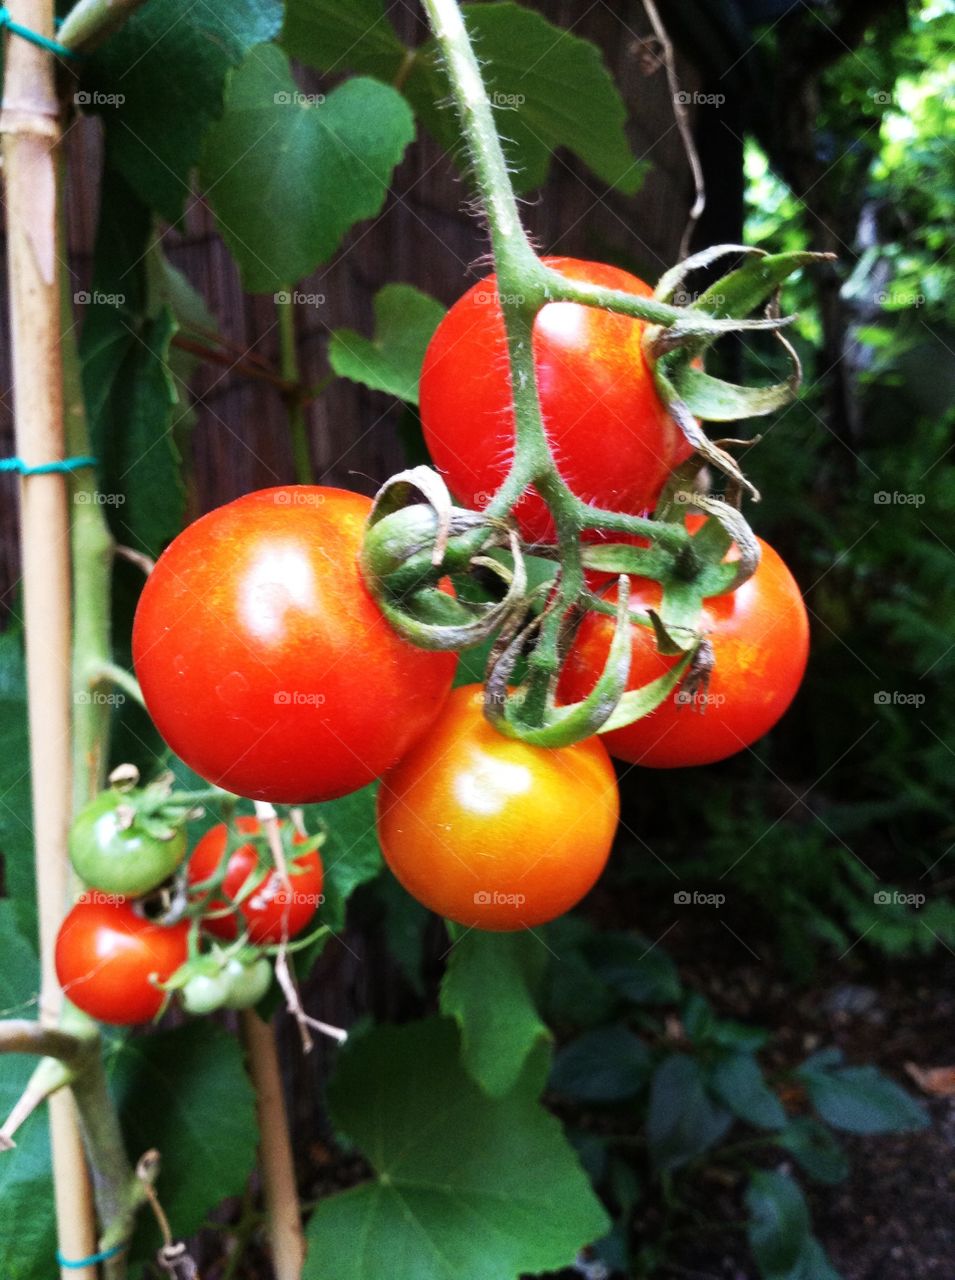 Tomatoes on the vine 